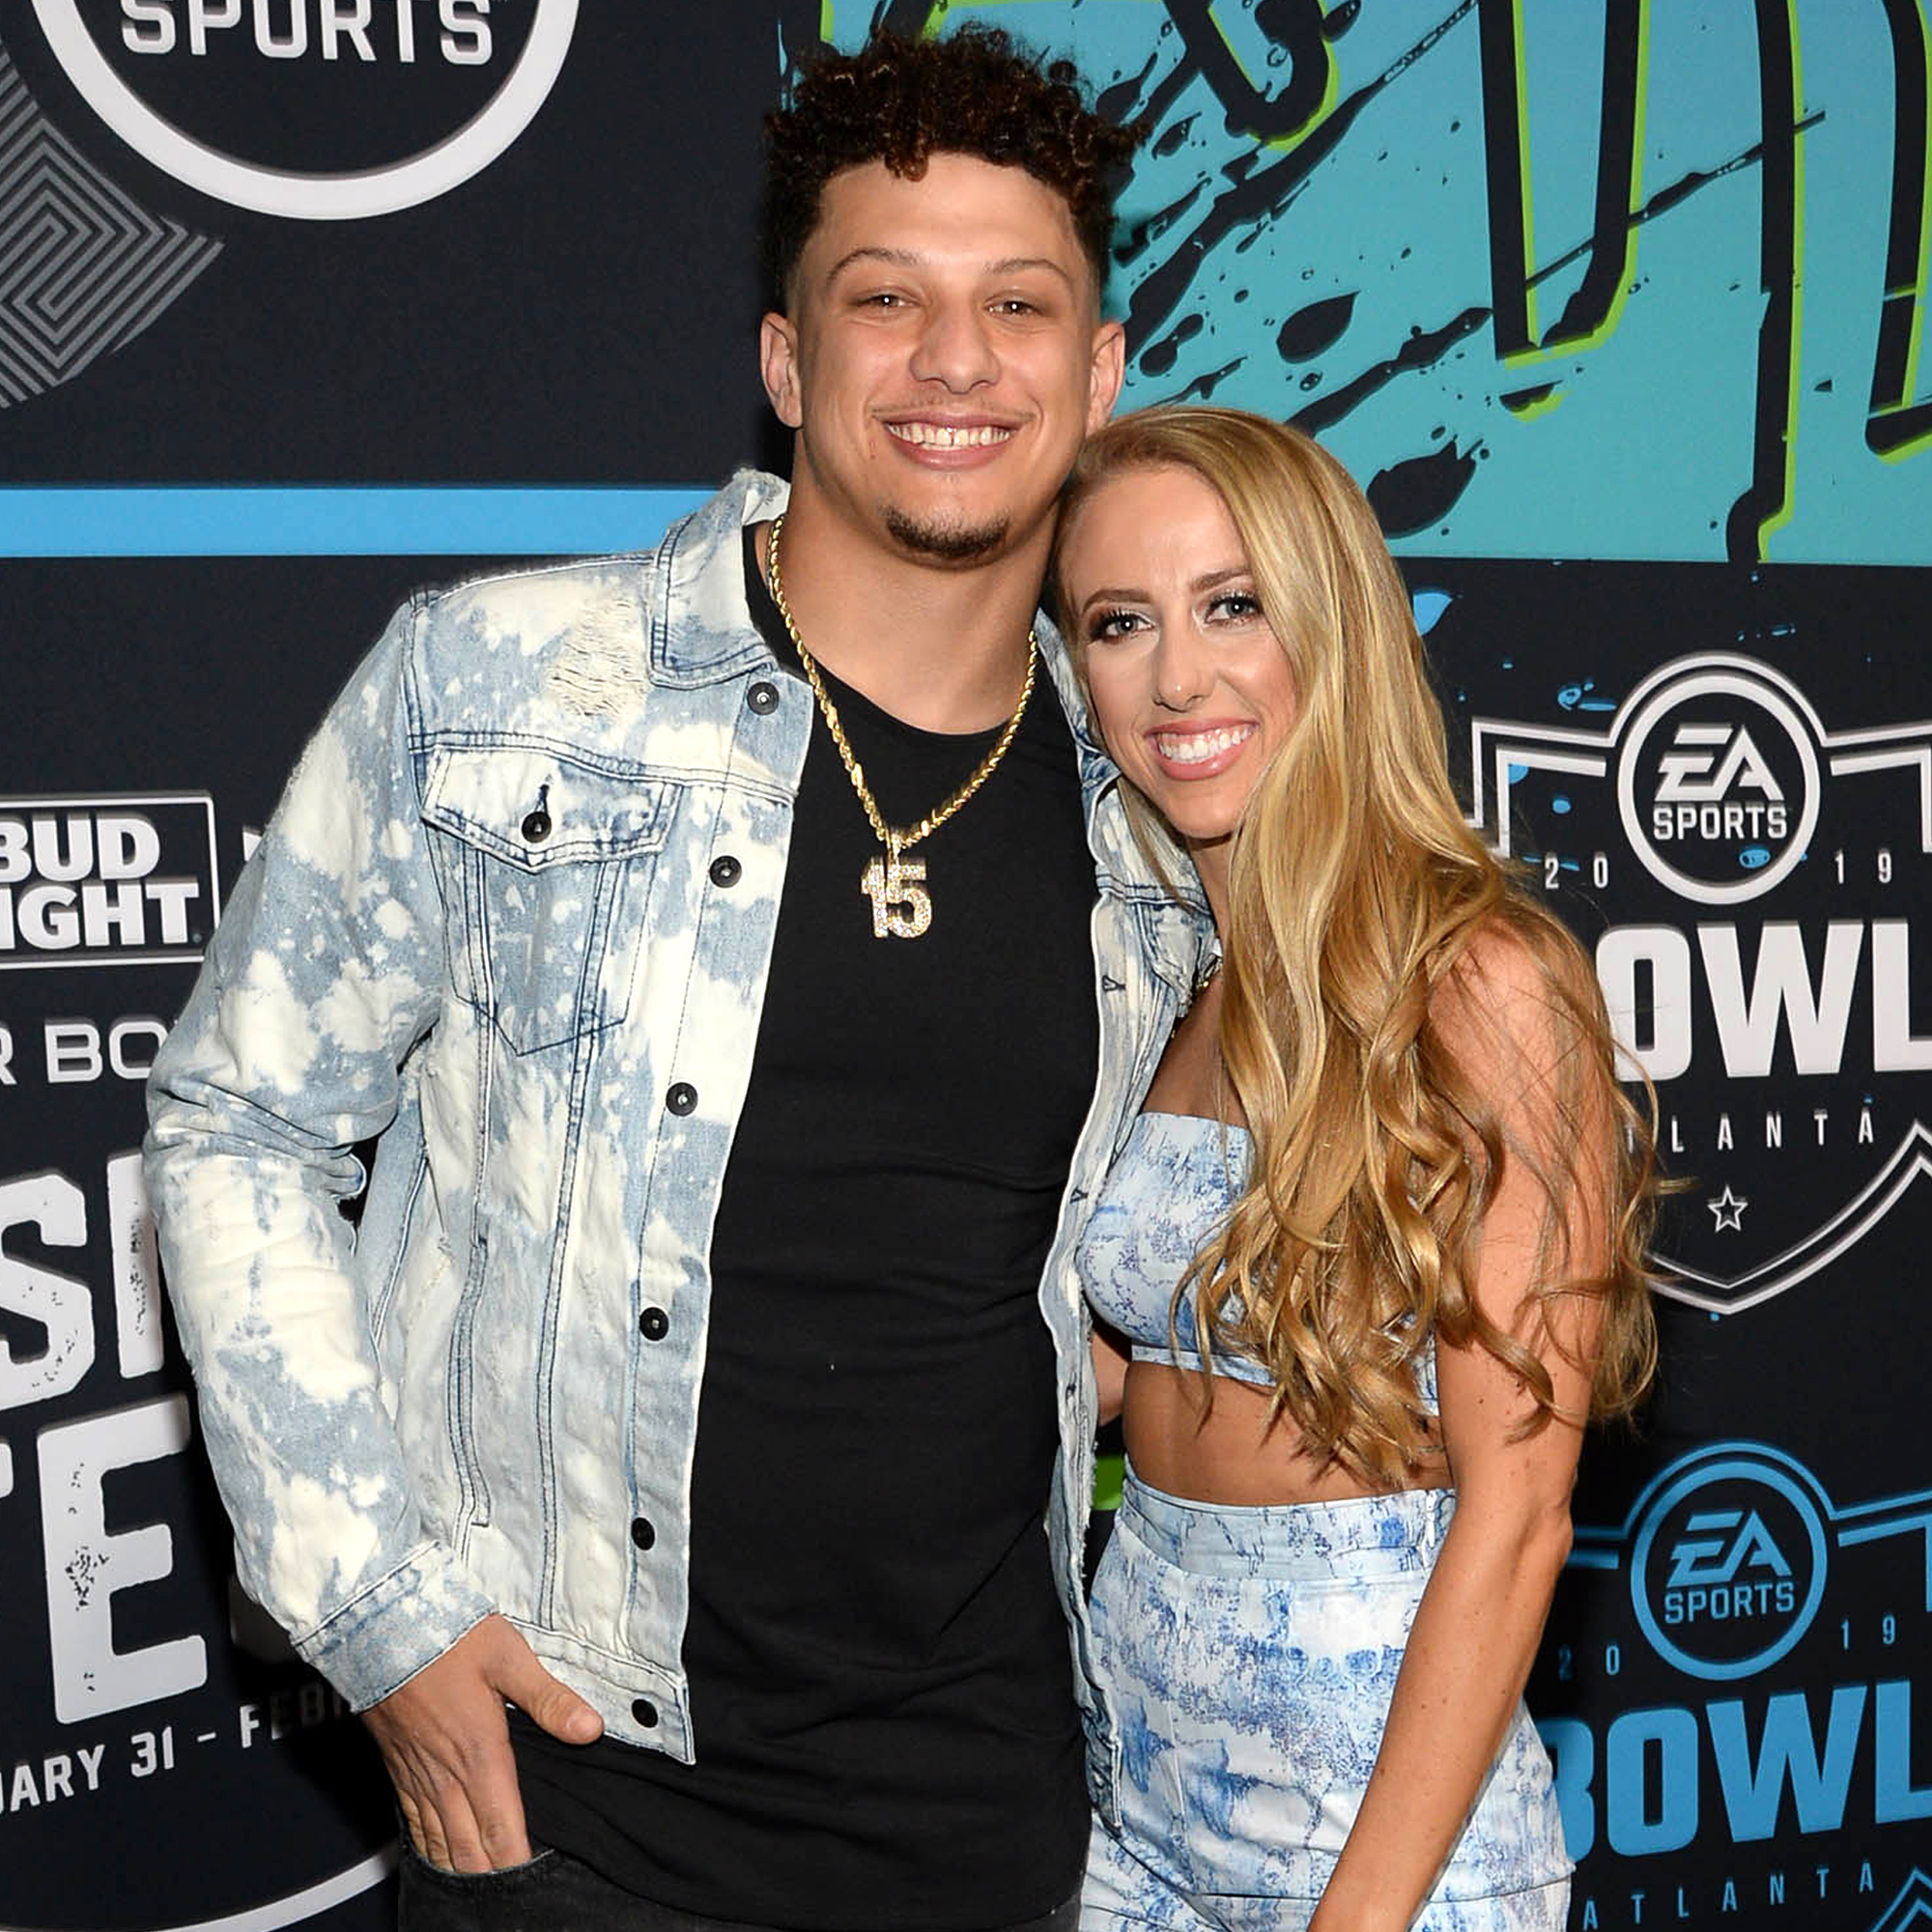 Brittany Mahomes shares son Bronze's excitement for Patrick Mahomes' outing  in the preseason -“Ready for gameday”